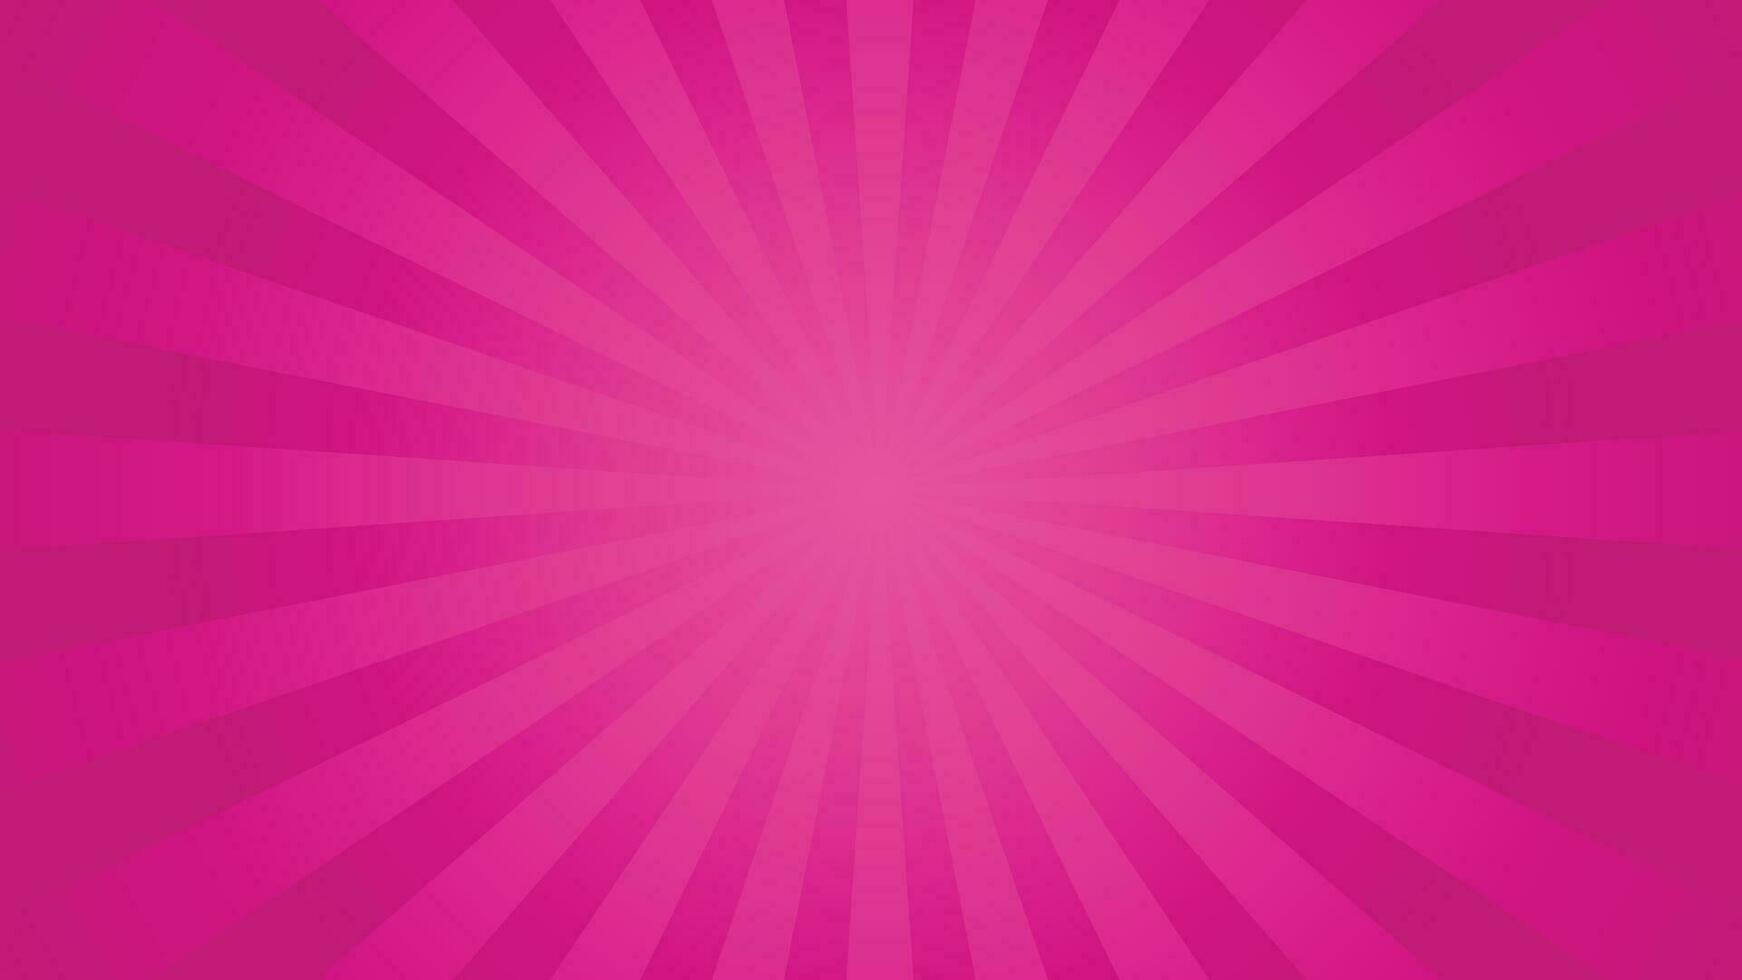 Pink zoom out effect background vector